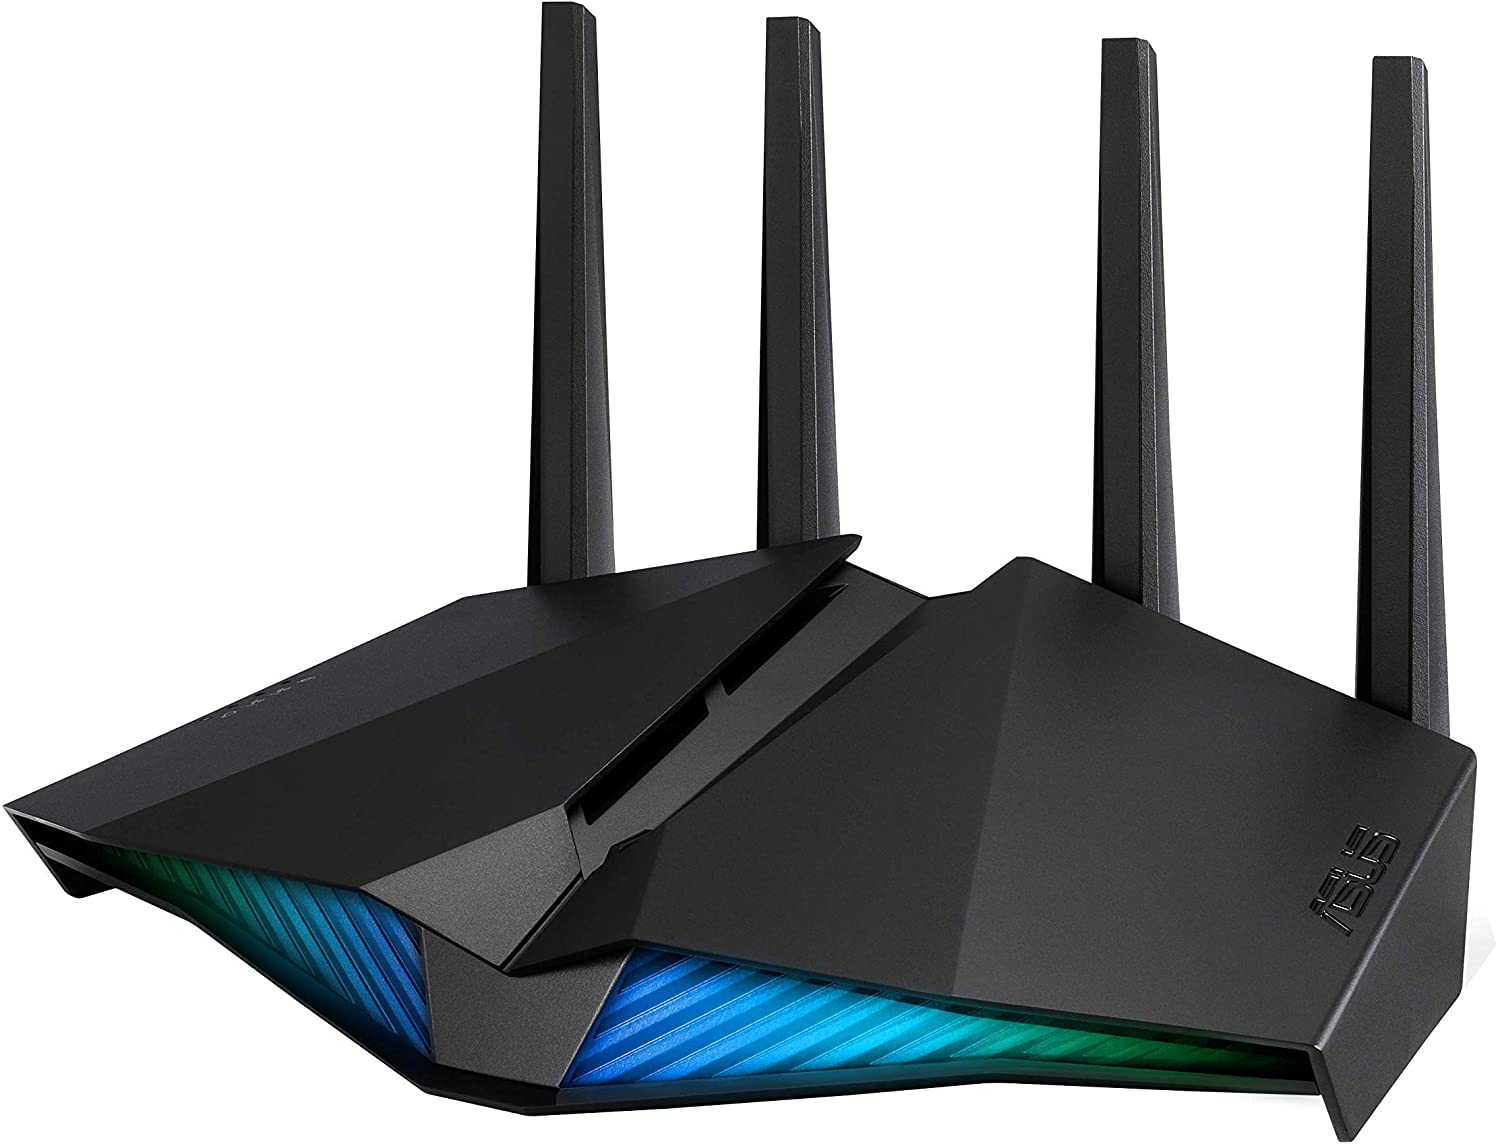 ASUS RT-AX82U 5400 Dual Band + Wi-Fi 6 Gaming Router, PS5 Compatible, up to 2000 sq ft & 30+ devices, Mobile Game Mode, ASUS AURA RGB